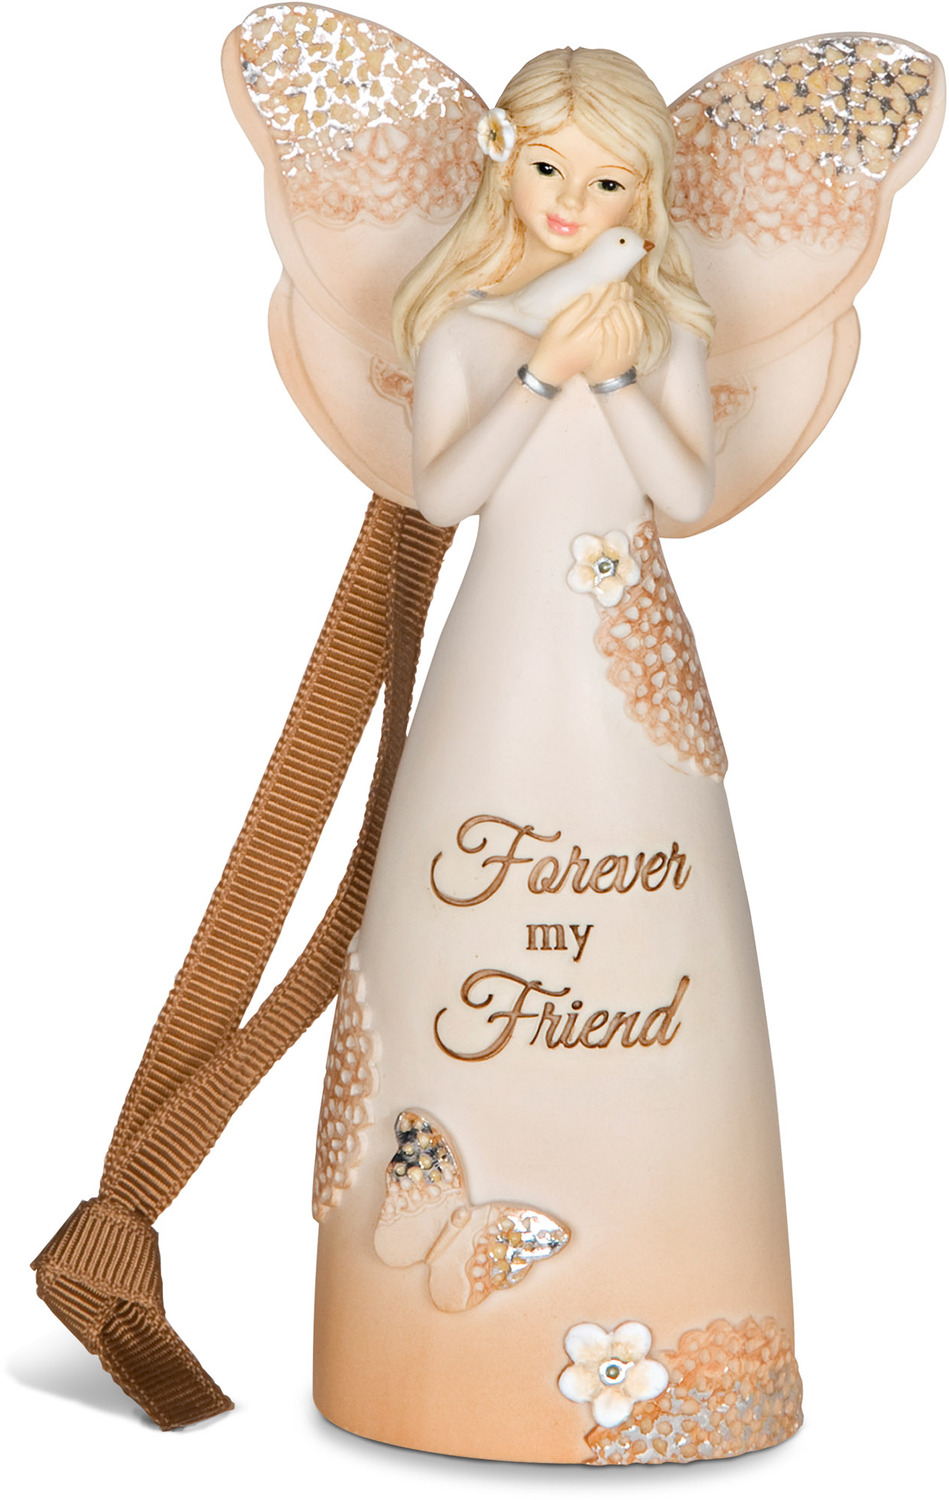 Forever Friend by Light Your Way Every Day - Forever Friend - 4.5" Angel Ornament